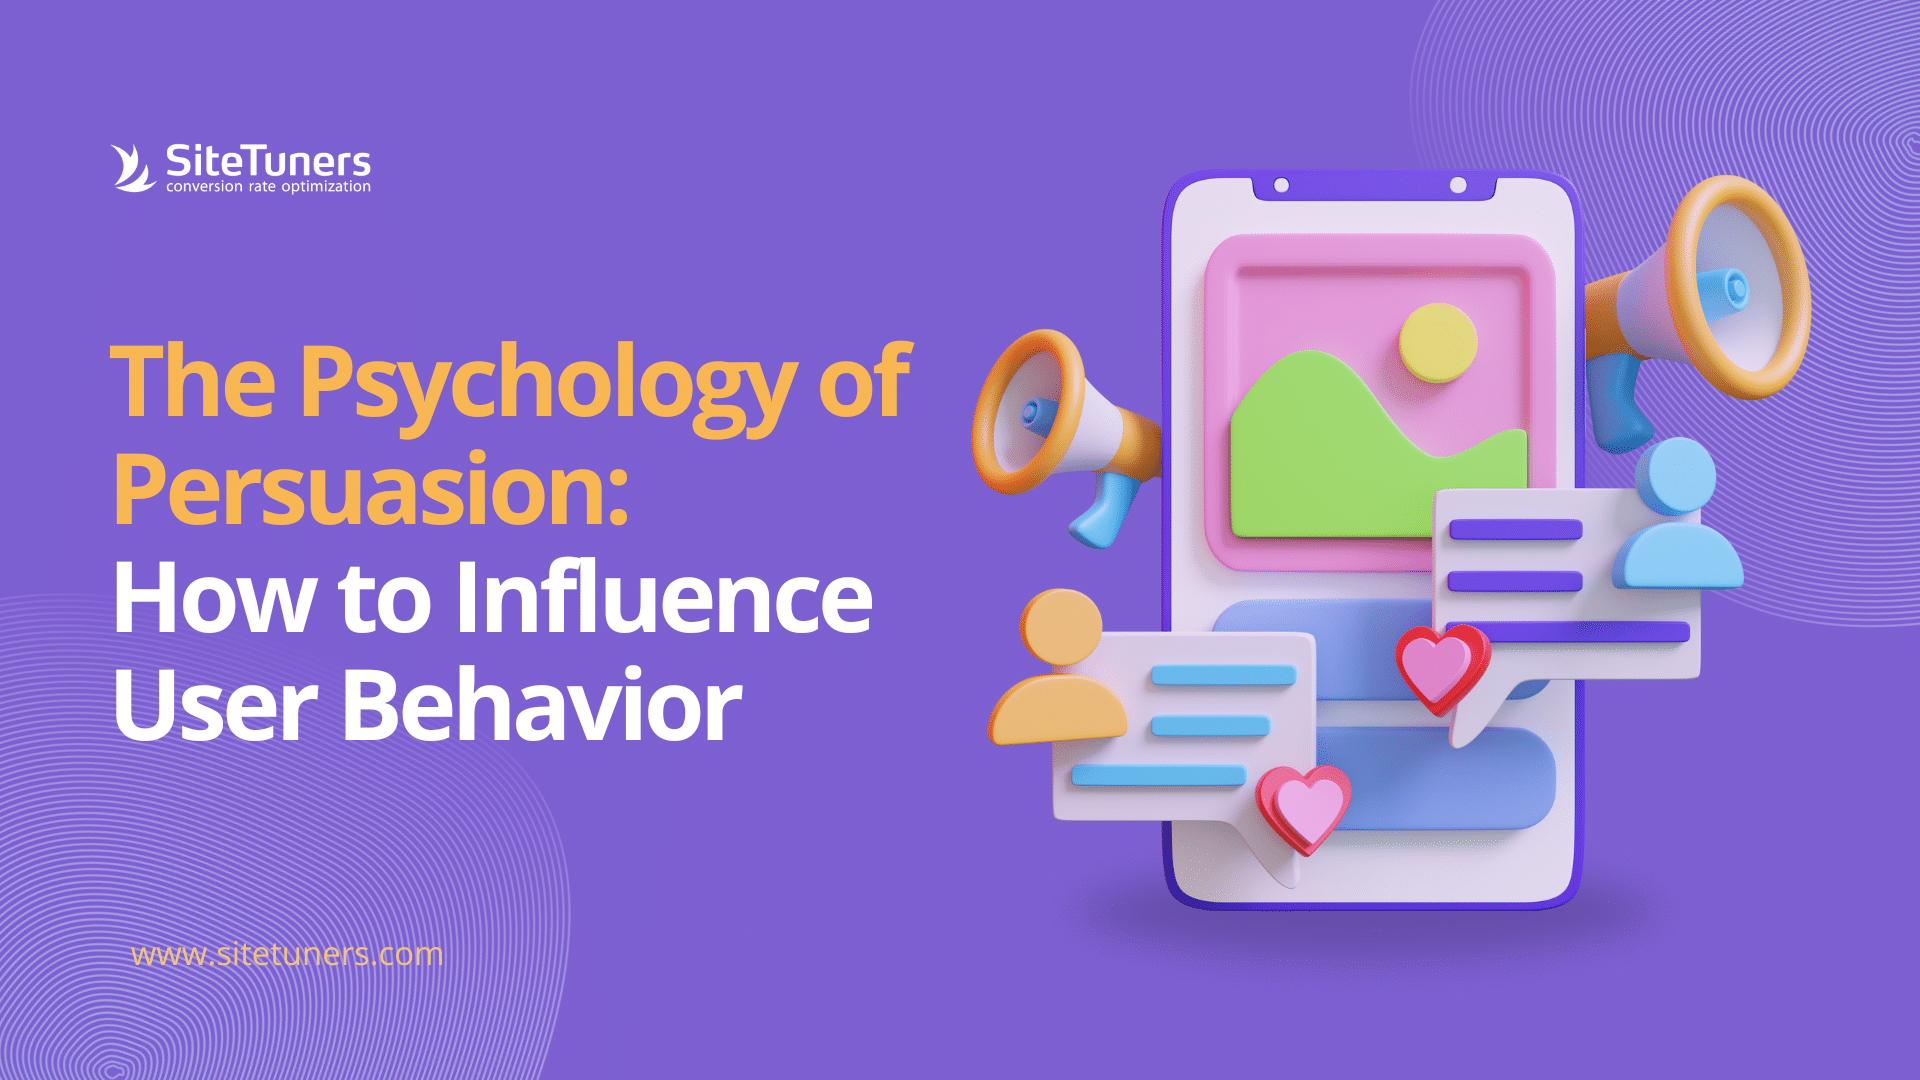 The Psychology of Persuasion: How to Influence User Behavior